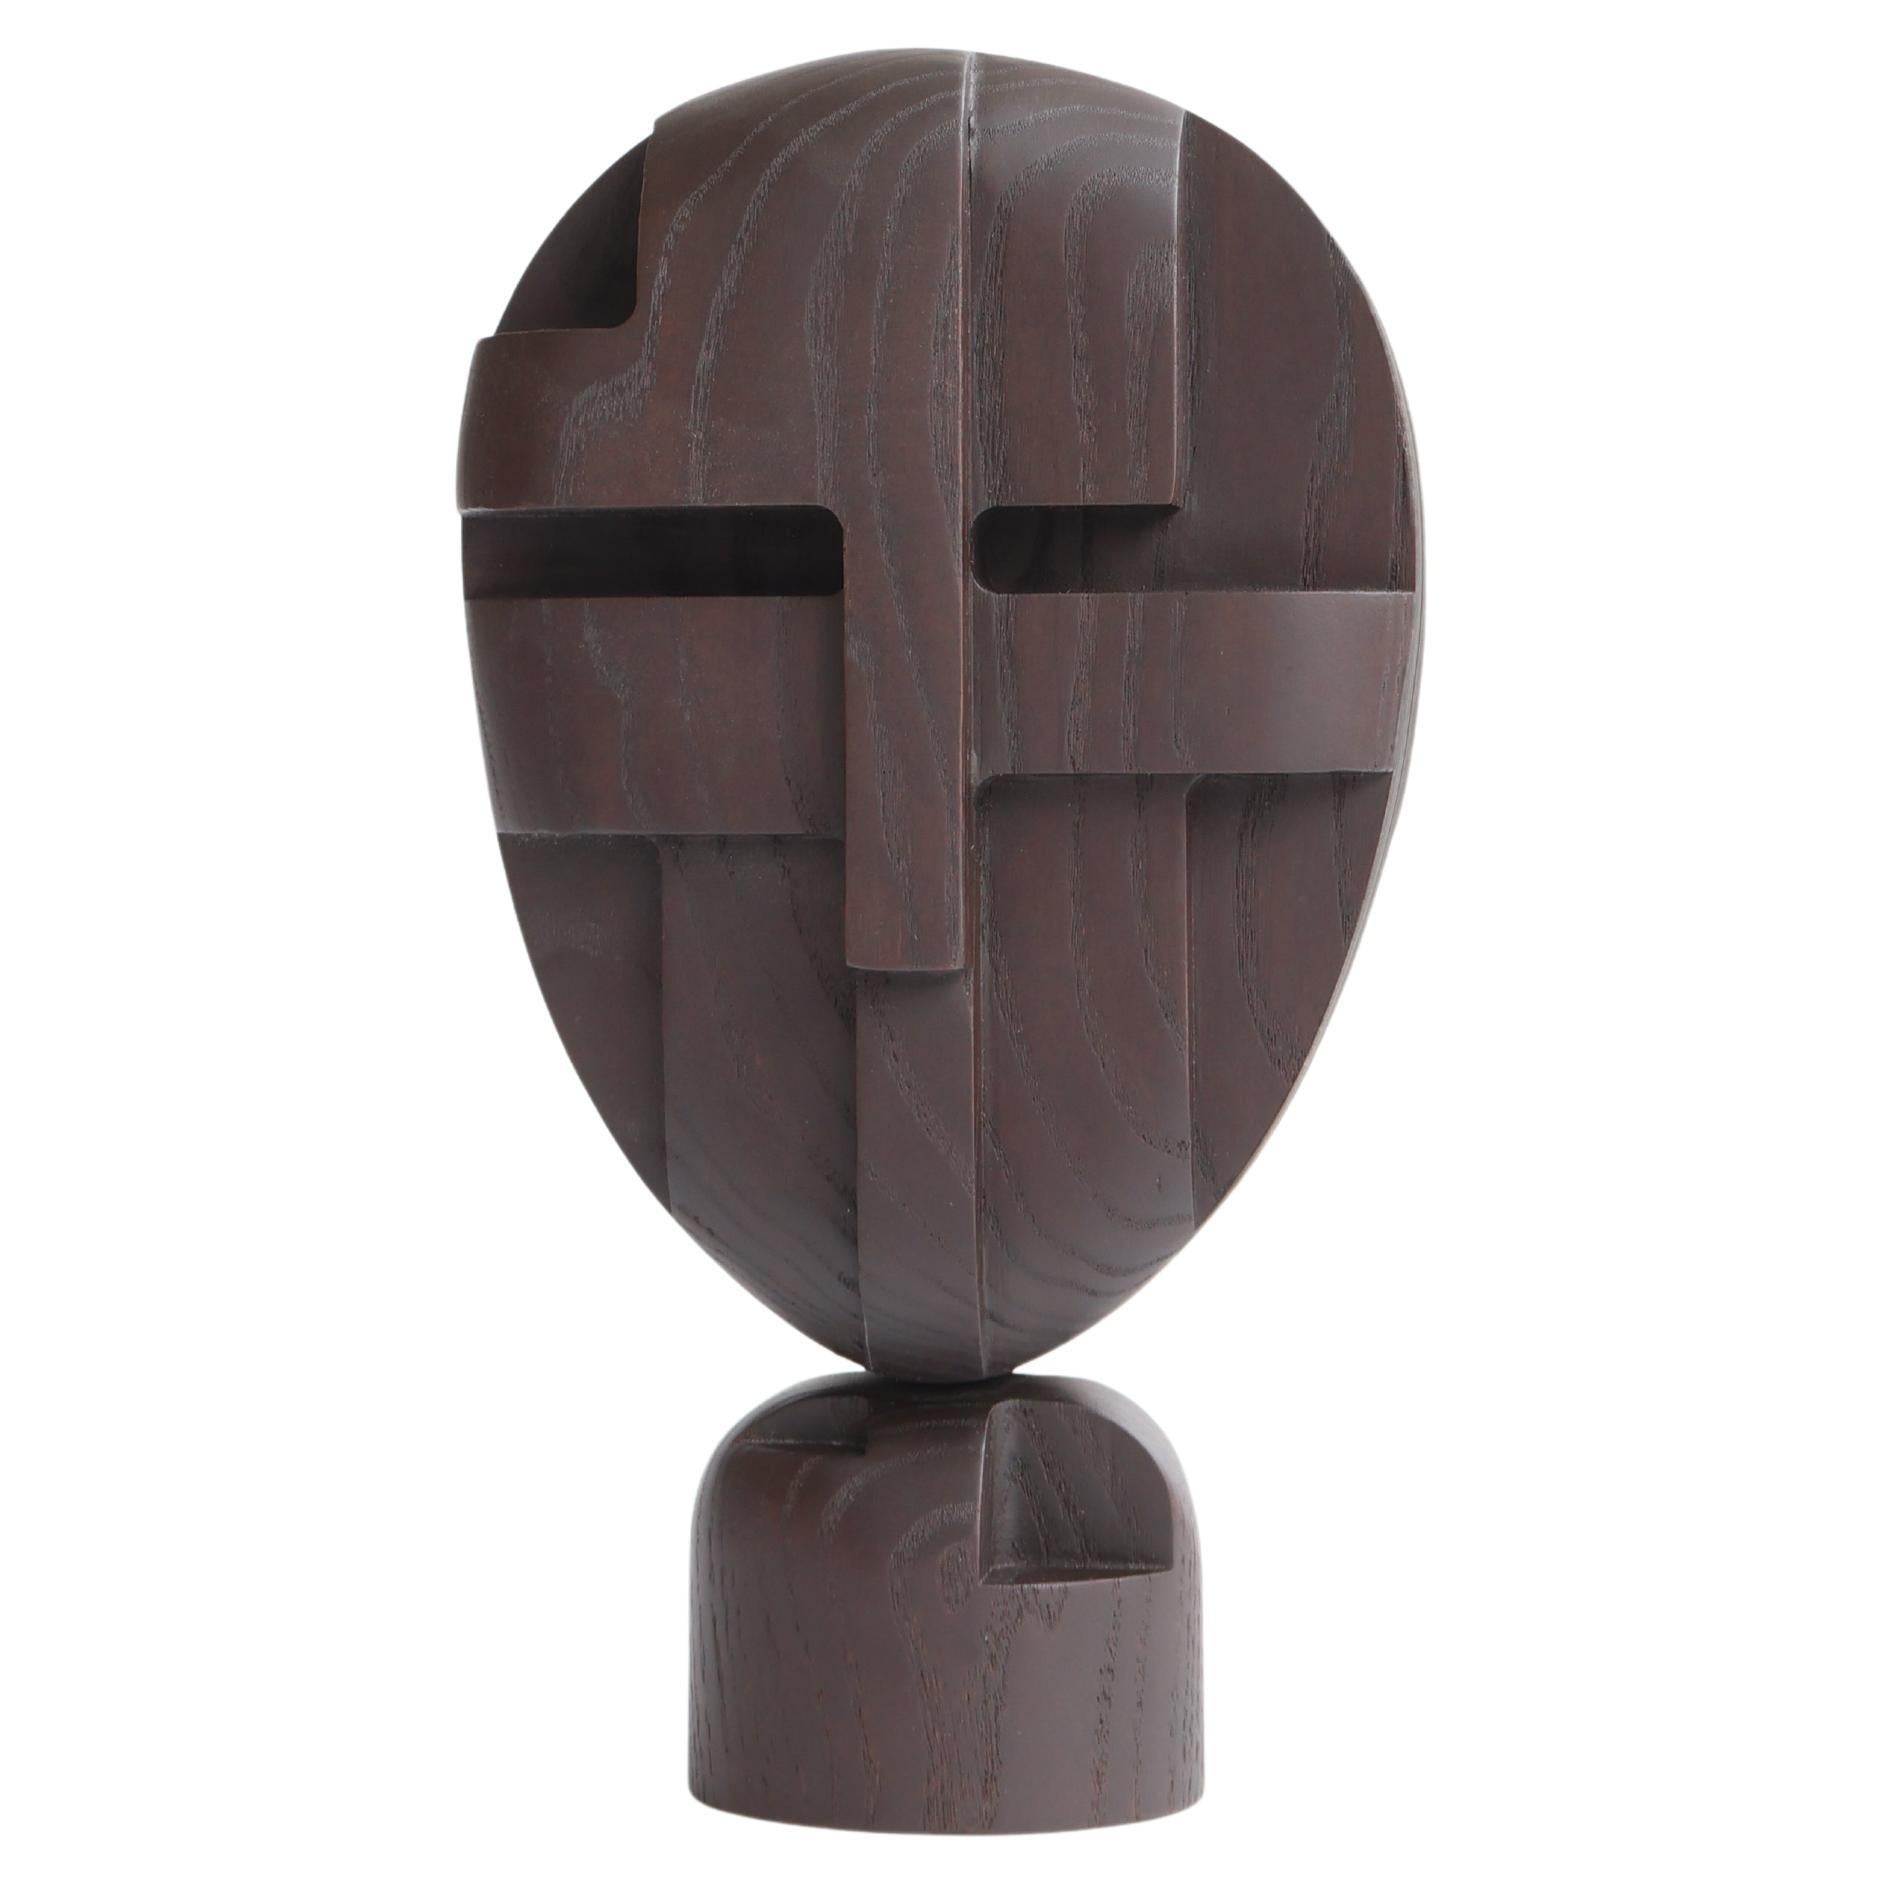 Origin Made Ornament and Crime Standing Sculpture (Mask) in Smoked Ash For Sale